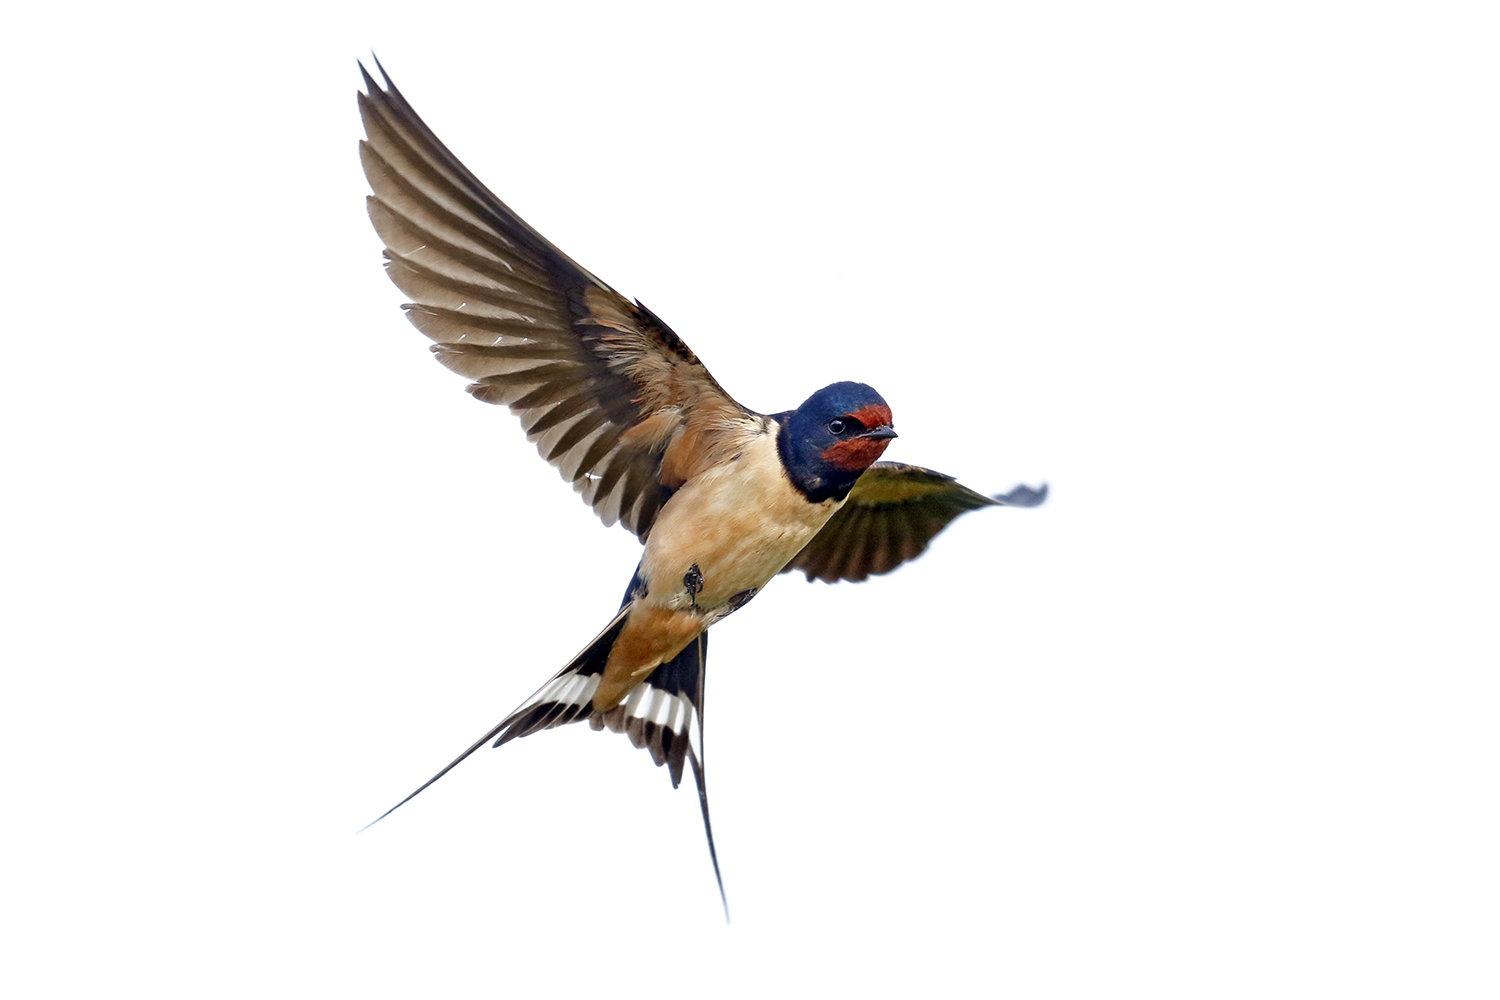 and 'round spring - flying swallow...